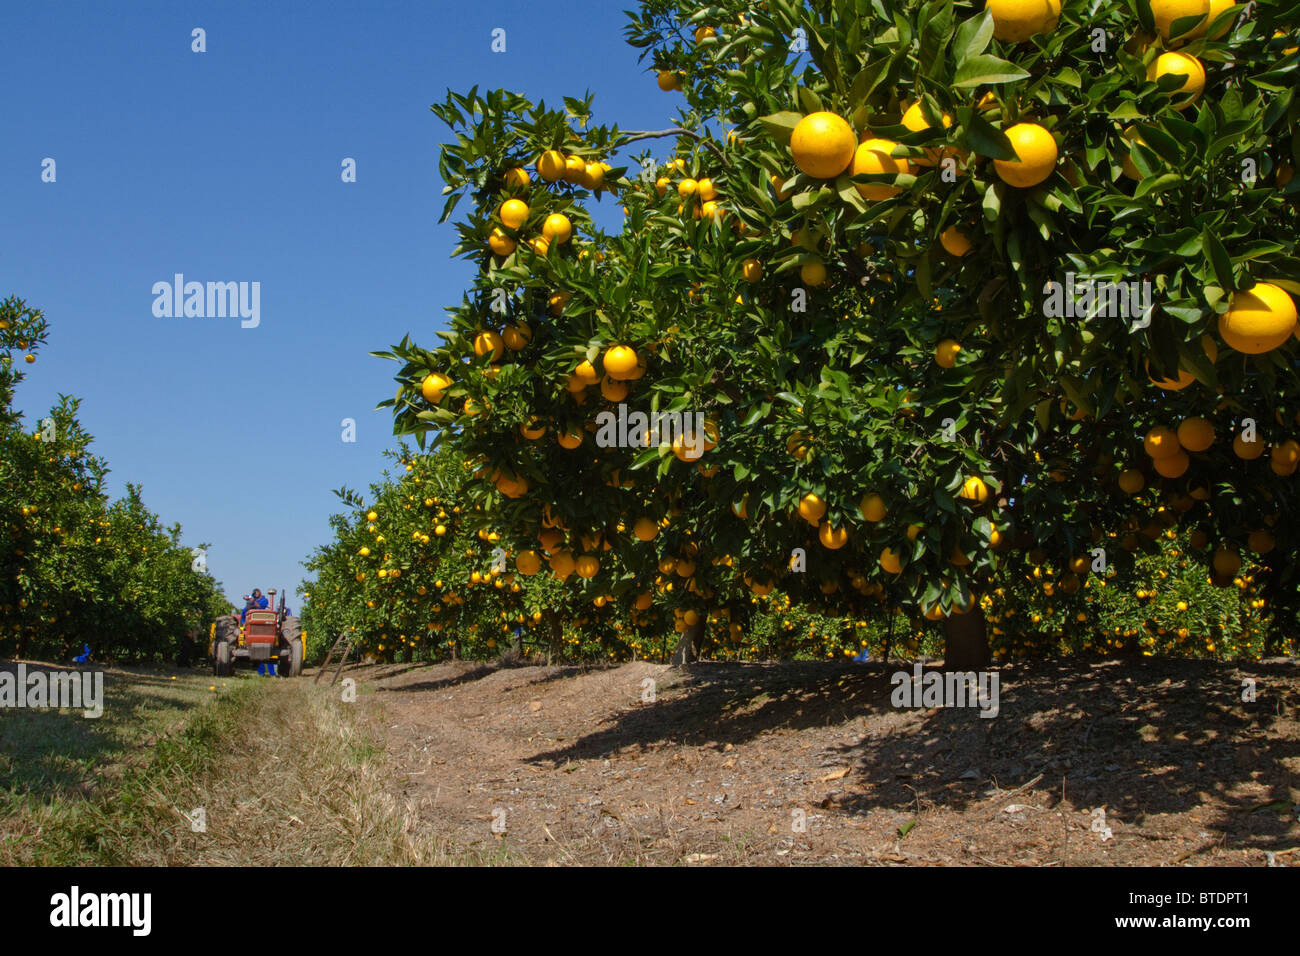 Oranges (Citrus sinensis) hanging on trees in a citrus orchard Stock Photo